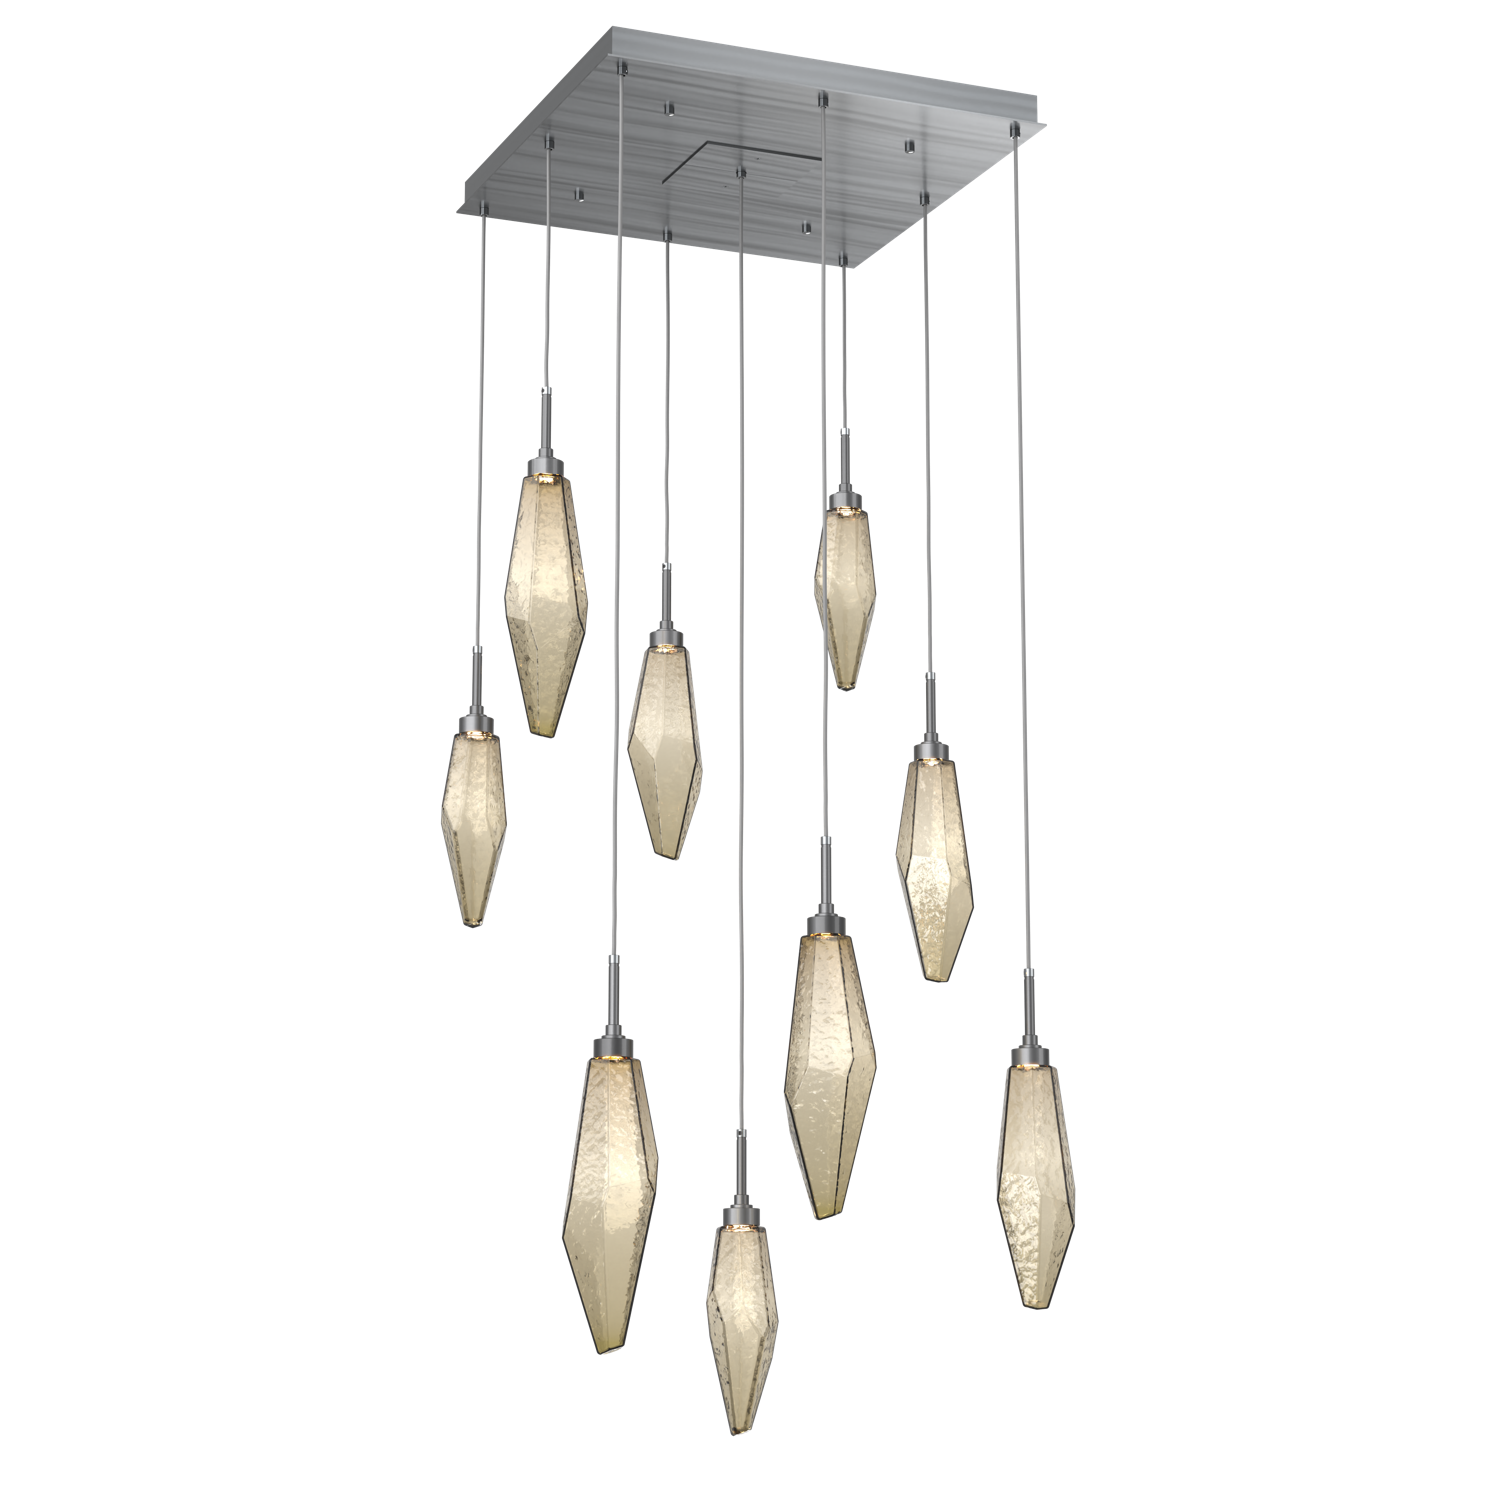 CHB0050-09-GM-CB-Hammerton-Studio-Rock-Crystal-9-light-square-pendant-chandelier-with-gunmetal-finish-and-chilled-bronze-blown-glass-shades-and-LED-lamping